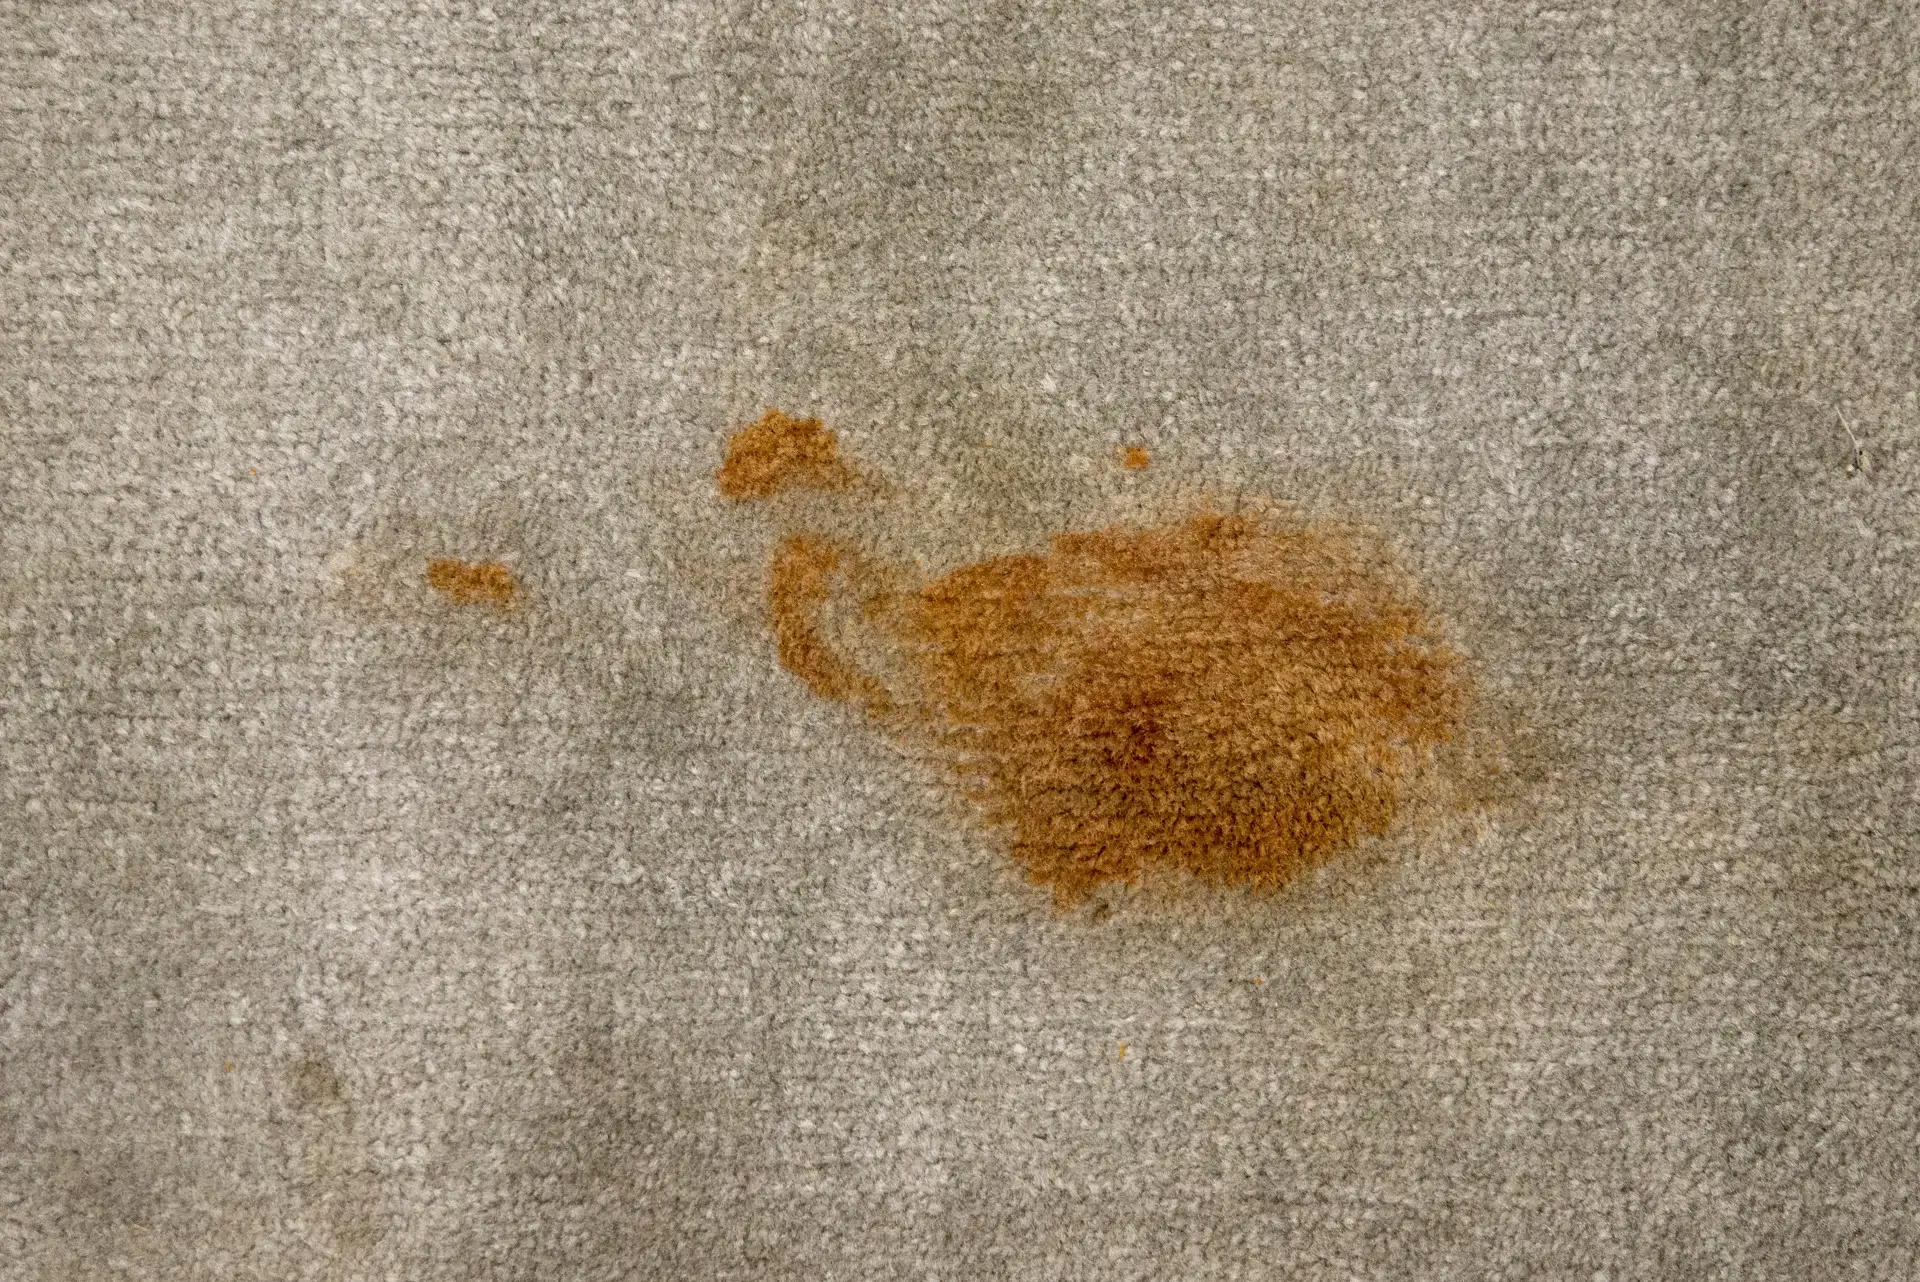 Effective Methods for Removing Coffee Stains from Carpet